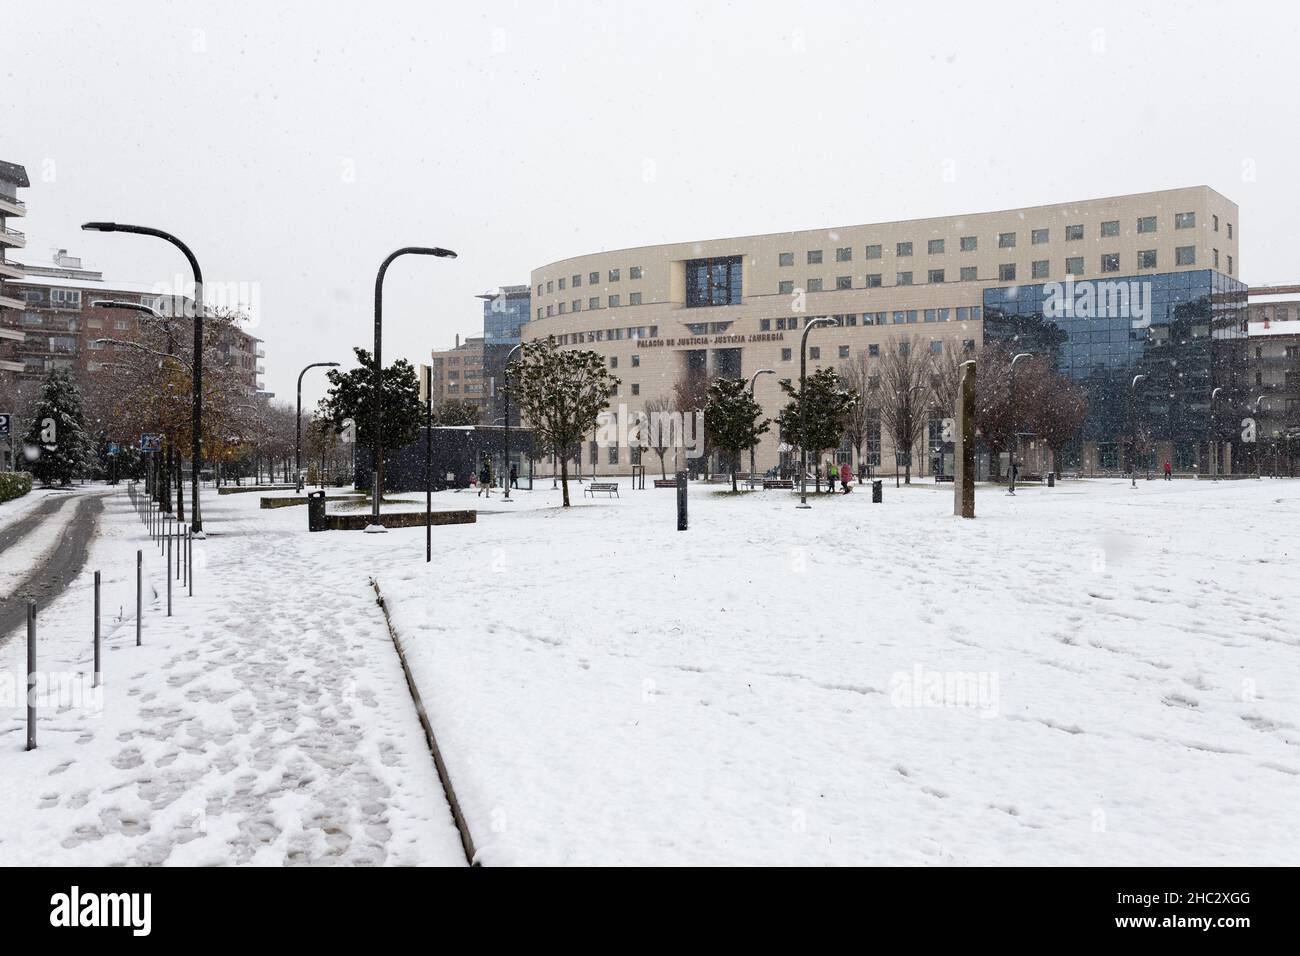 Pamplona, Spain - November 28, 2021 - Plaza Juez Elio square and Palace of Justice snowing. Stock Photo